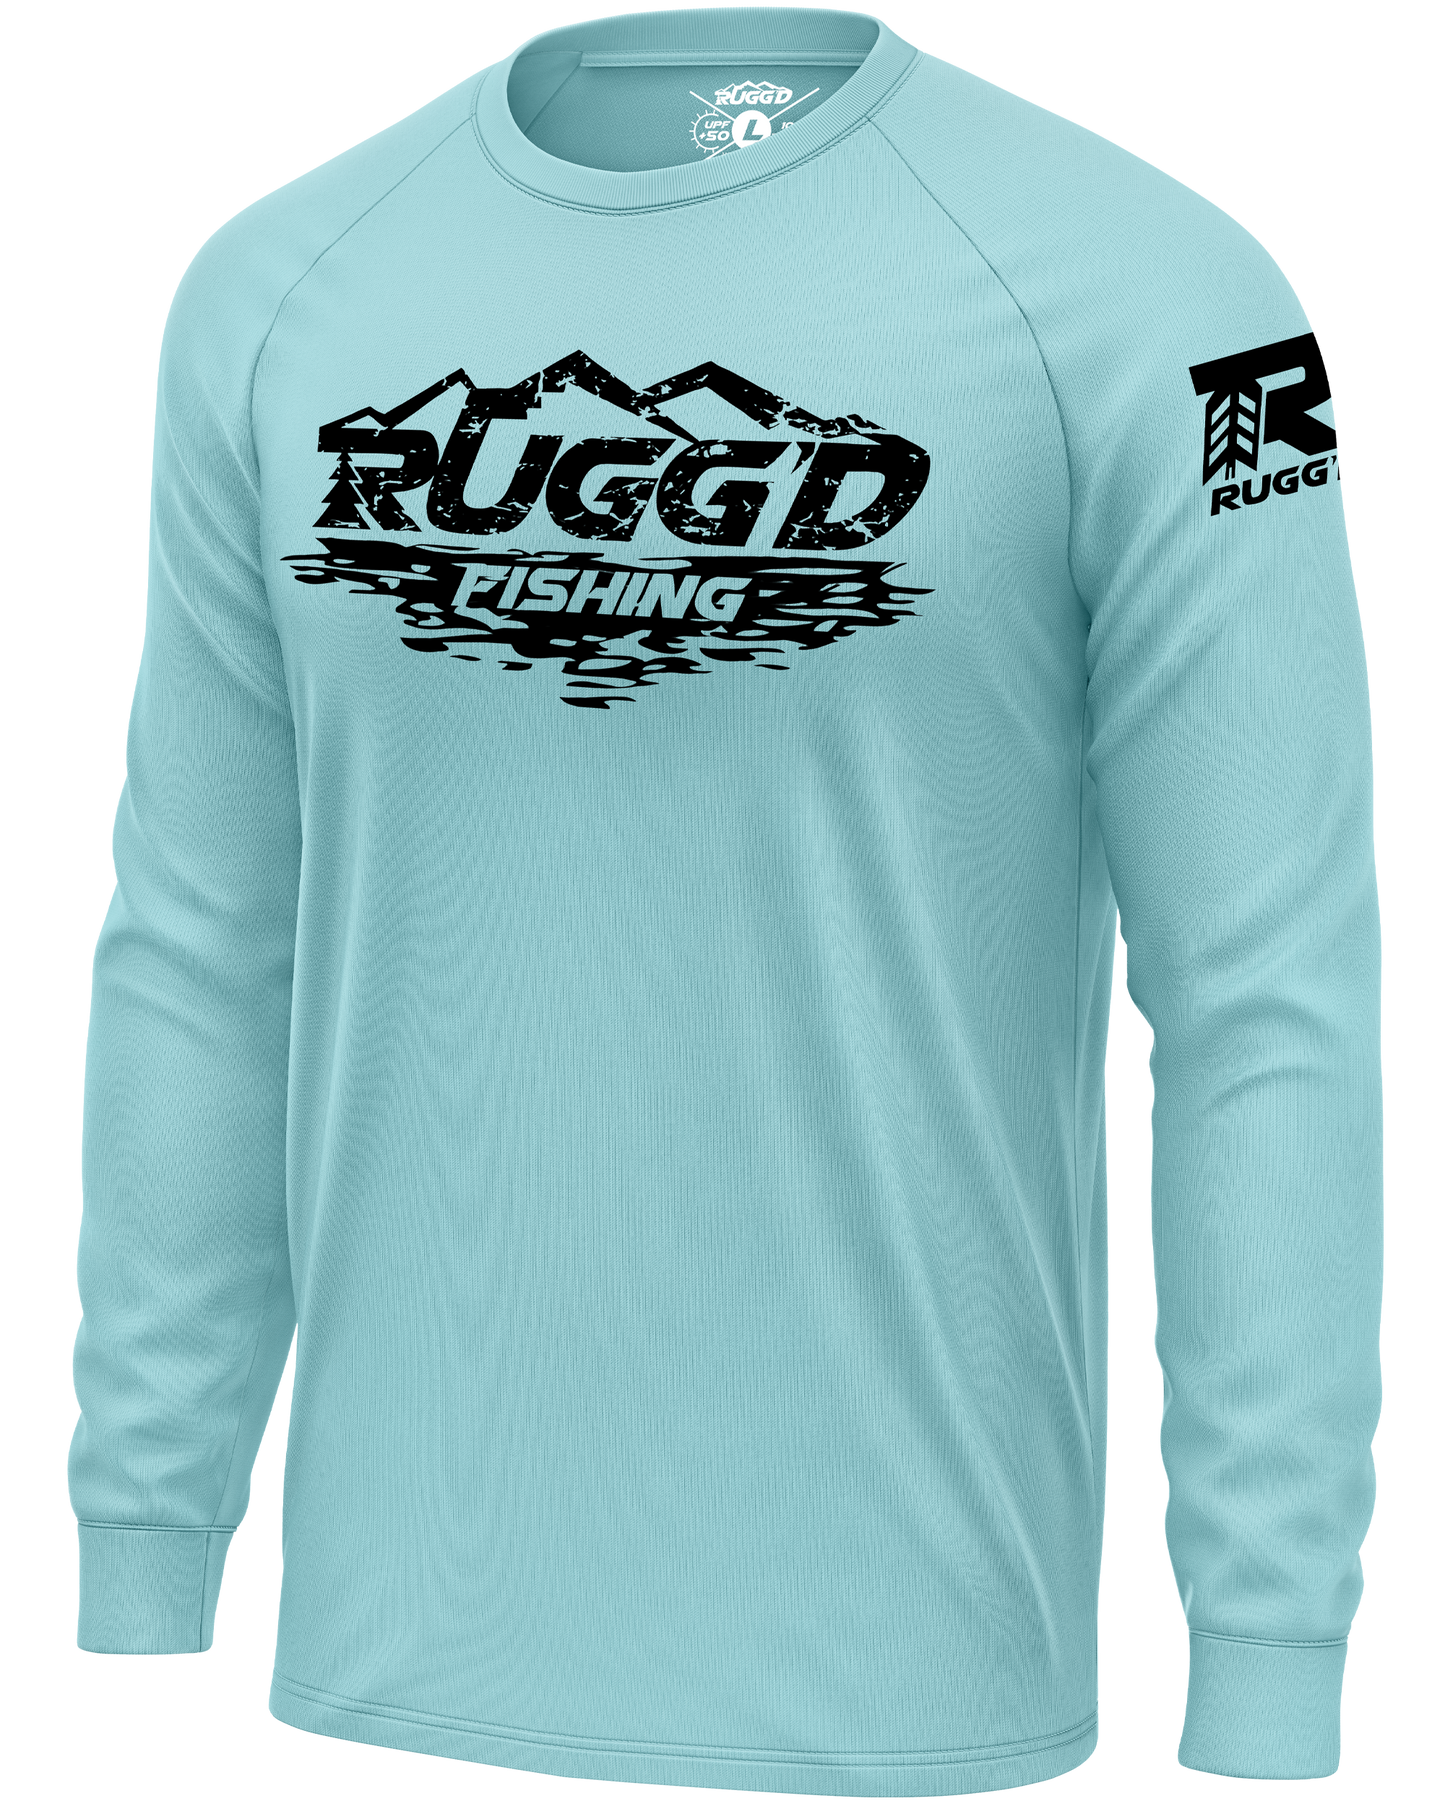 RUGG'D WATERS PERFORMANCE SHIRT